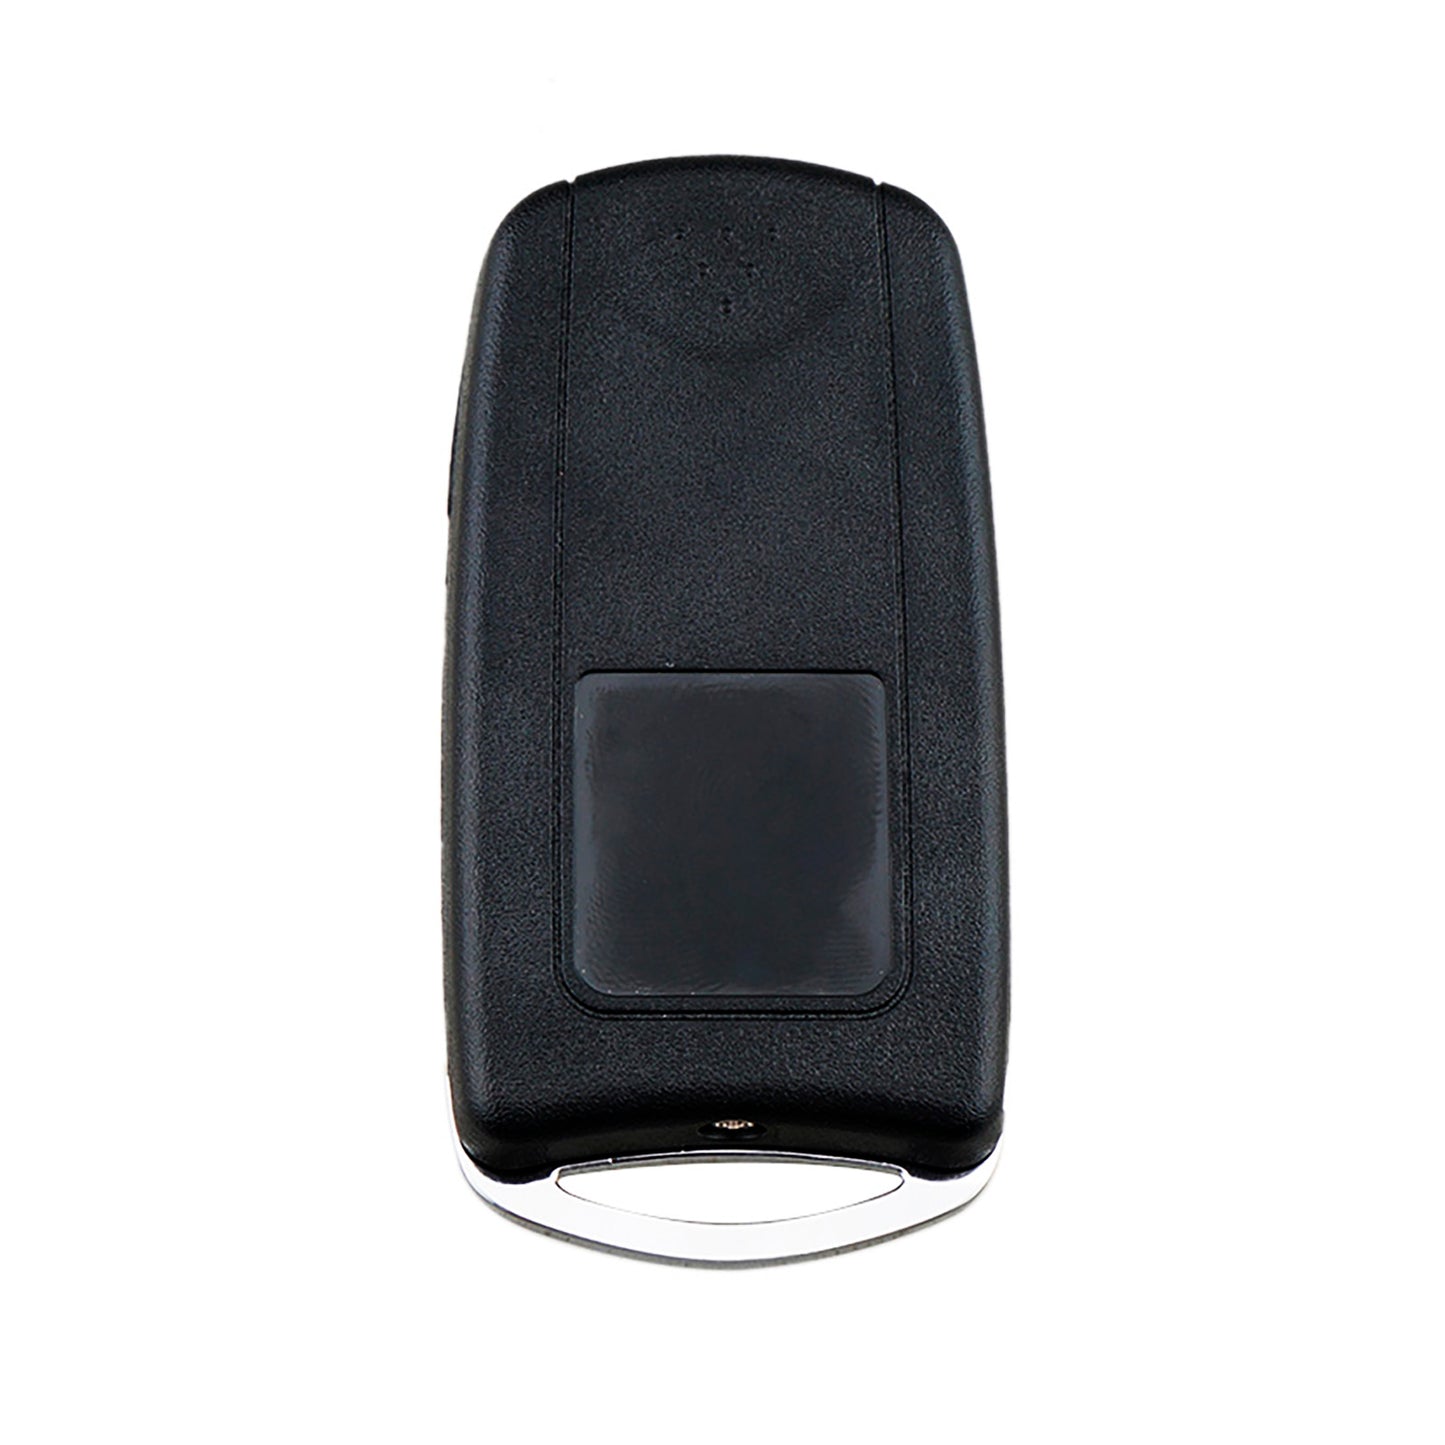 4 Buttons 313.8MHz Keyless Entry Fob Remote Car Key For 2007-2008 Acura TL FCC ID:OUCG8D-439H-A SKU : J260